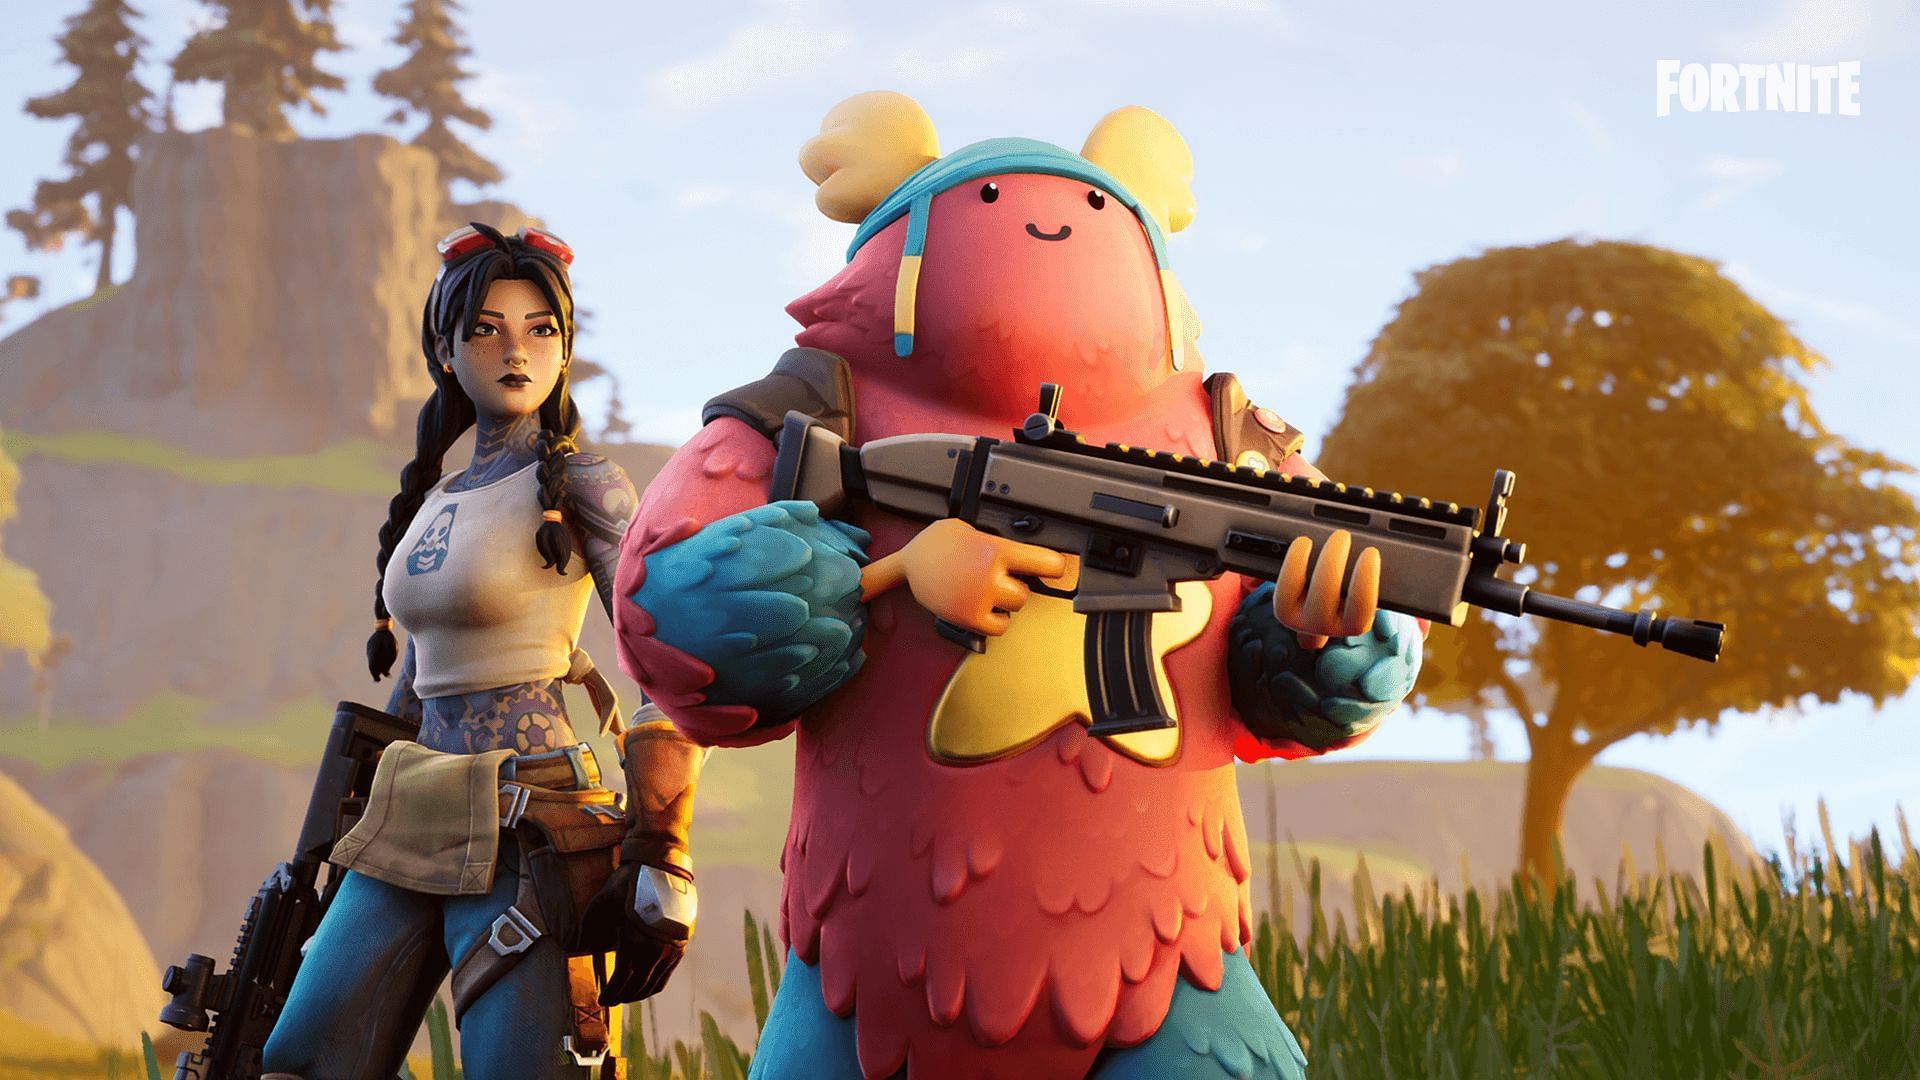 Weapon attachments will be another game-changer in Fortnite (Image via Epic Games)